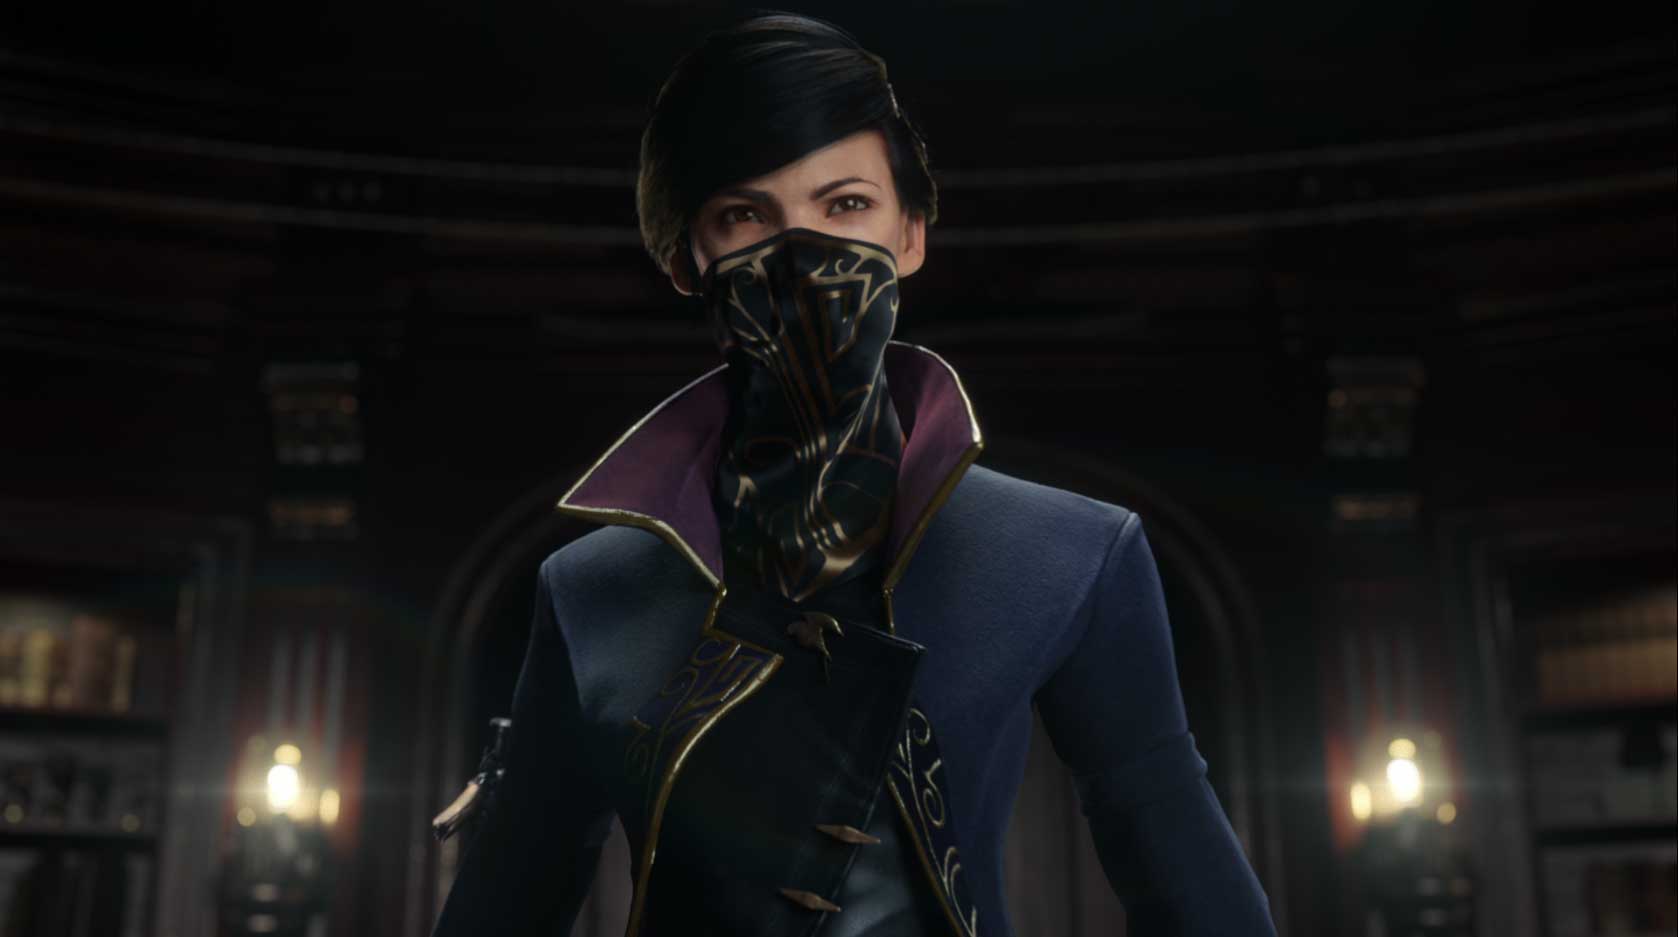 [E3 2016] Watch the first Dishonored 2 Gameplay Trailer